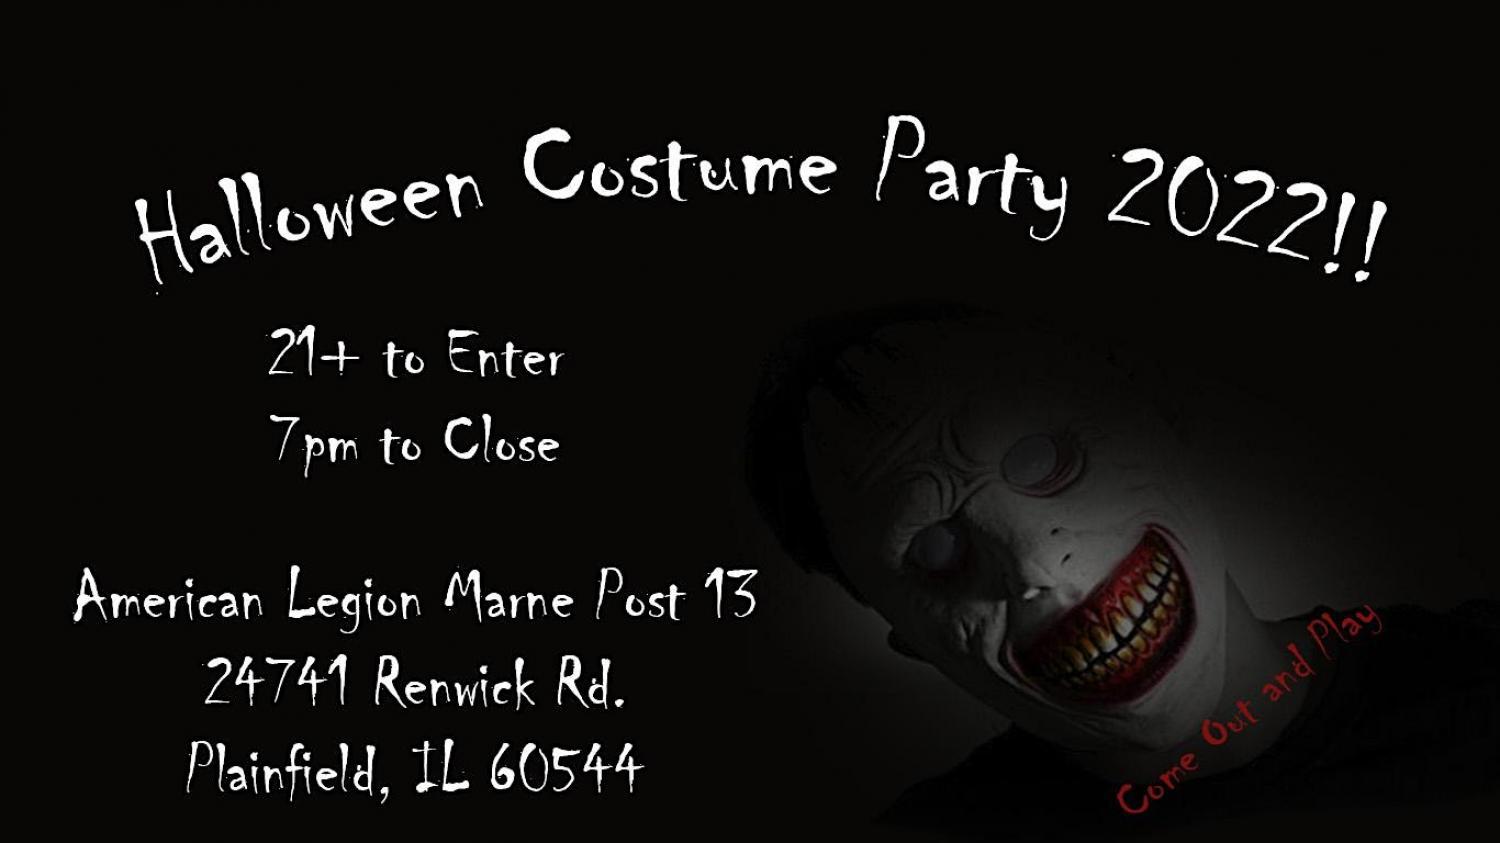 Halloween Costume Party 2022
Sat Oct 22, 7:00 PM - Sun Oct 23, 1:30 AM
in 2 days